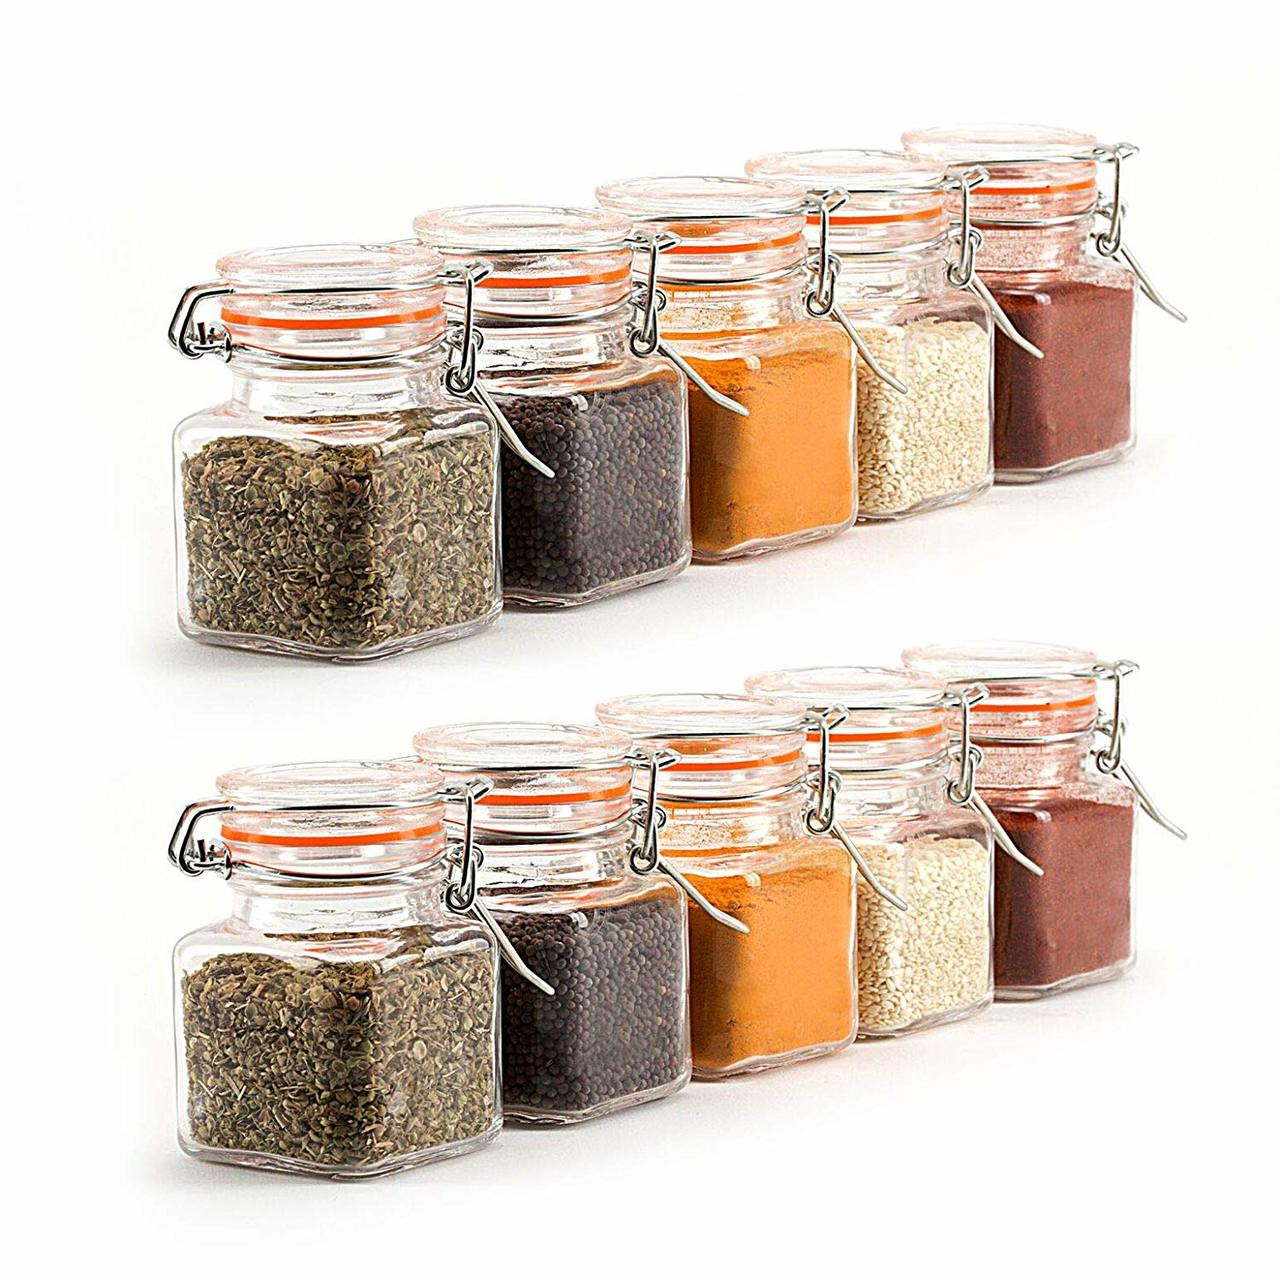 2.4 oz Spice Jar with Clasp - Whisk